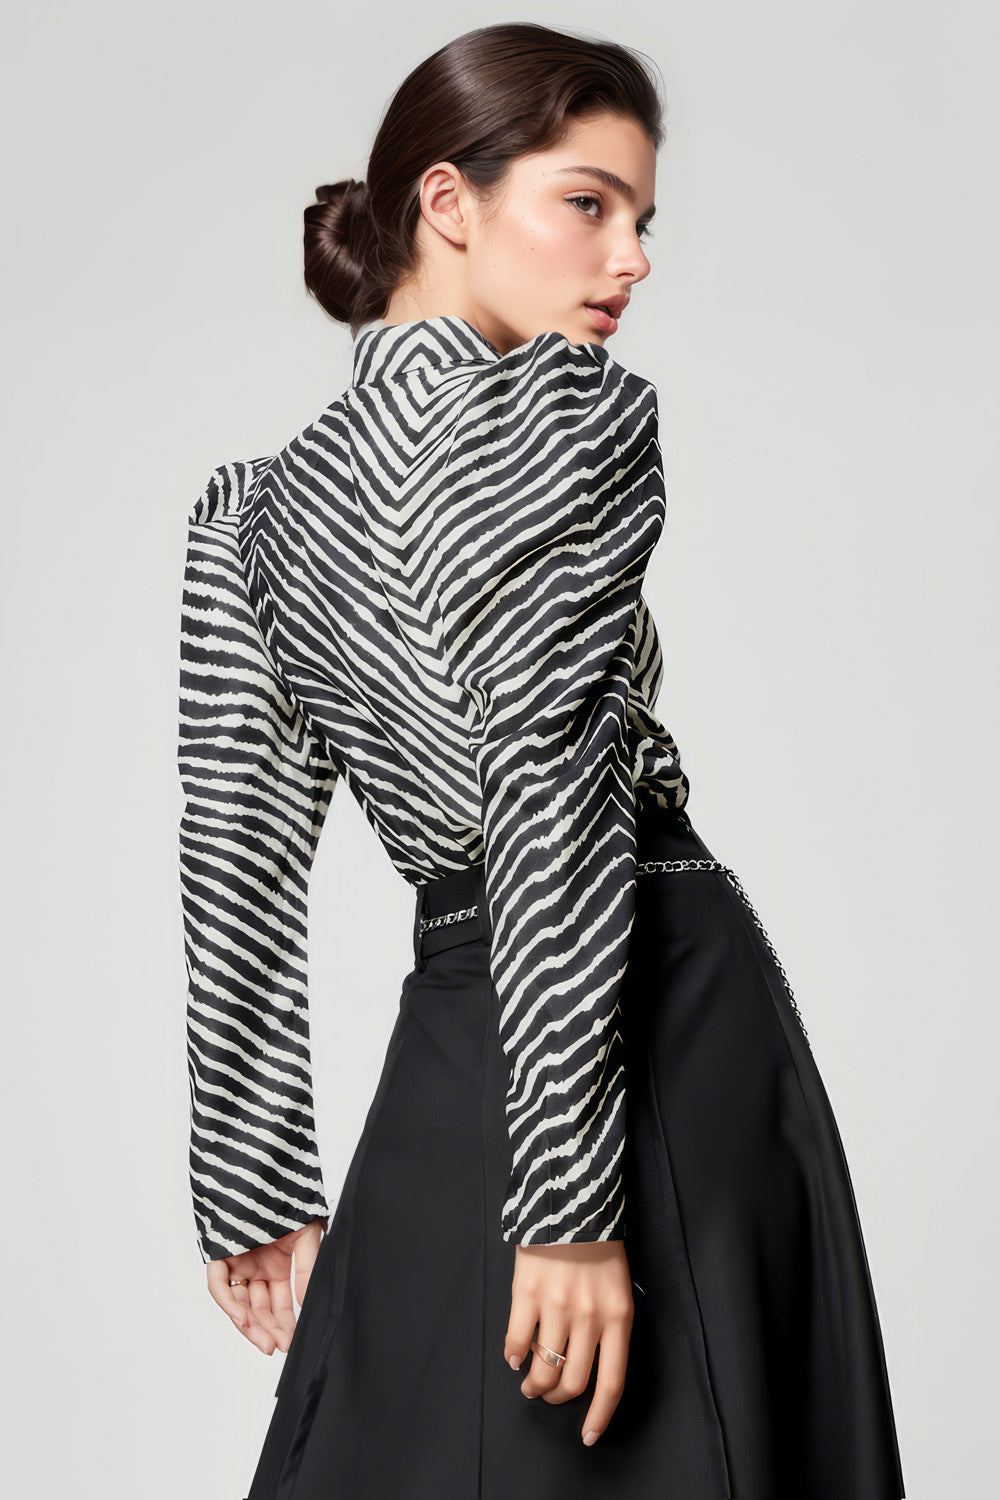 Patterned Shirt with Oversized Shoulders - Black & White